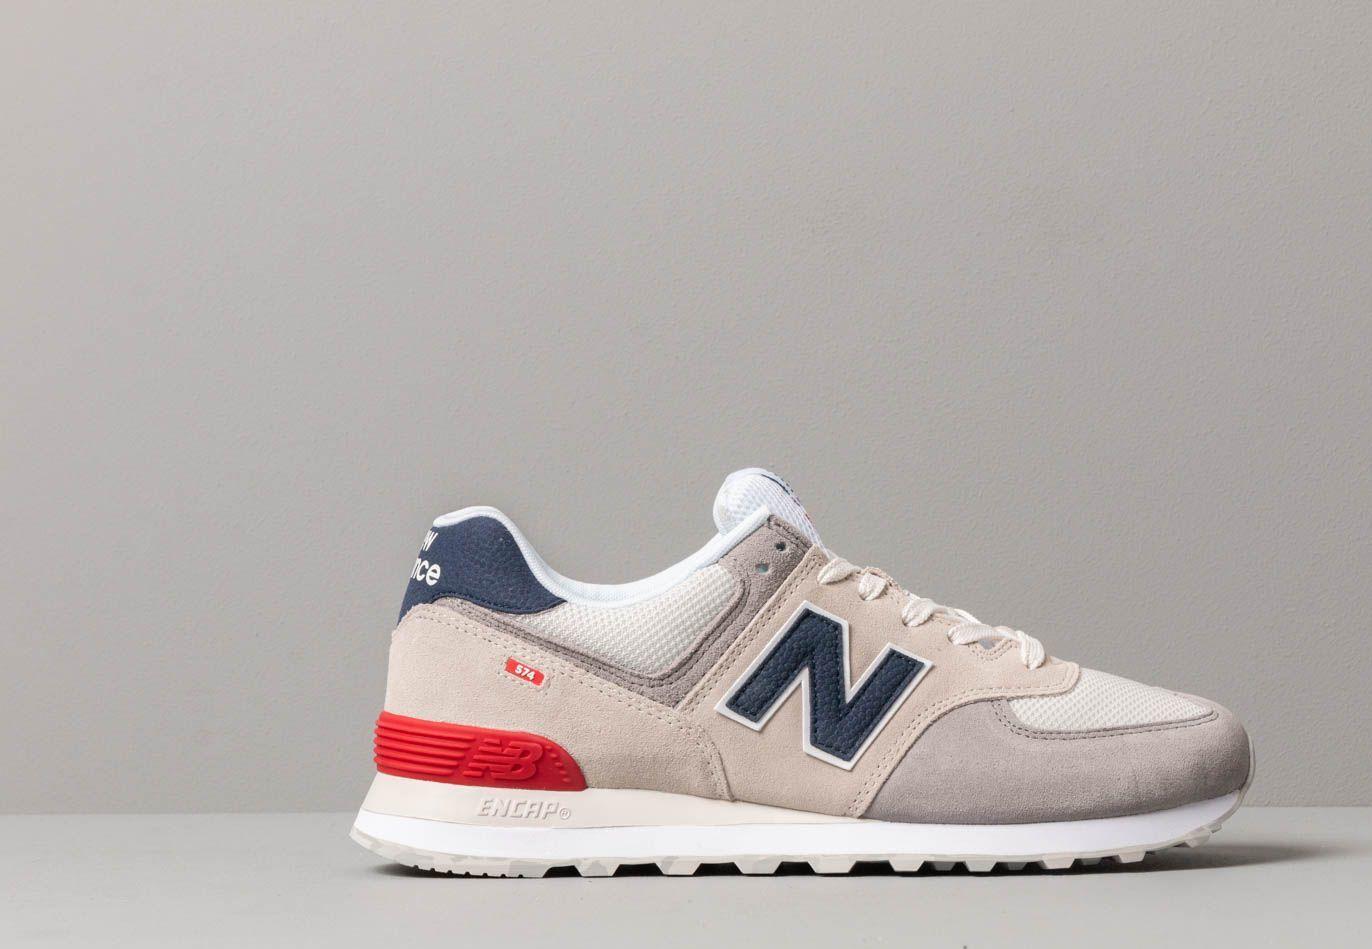 New Balance 574 White Red Blue Norway, SAVE 33% - aveclumiere.com